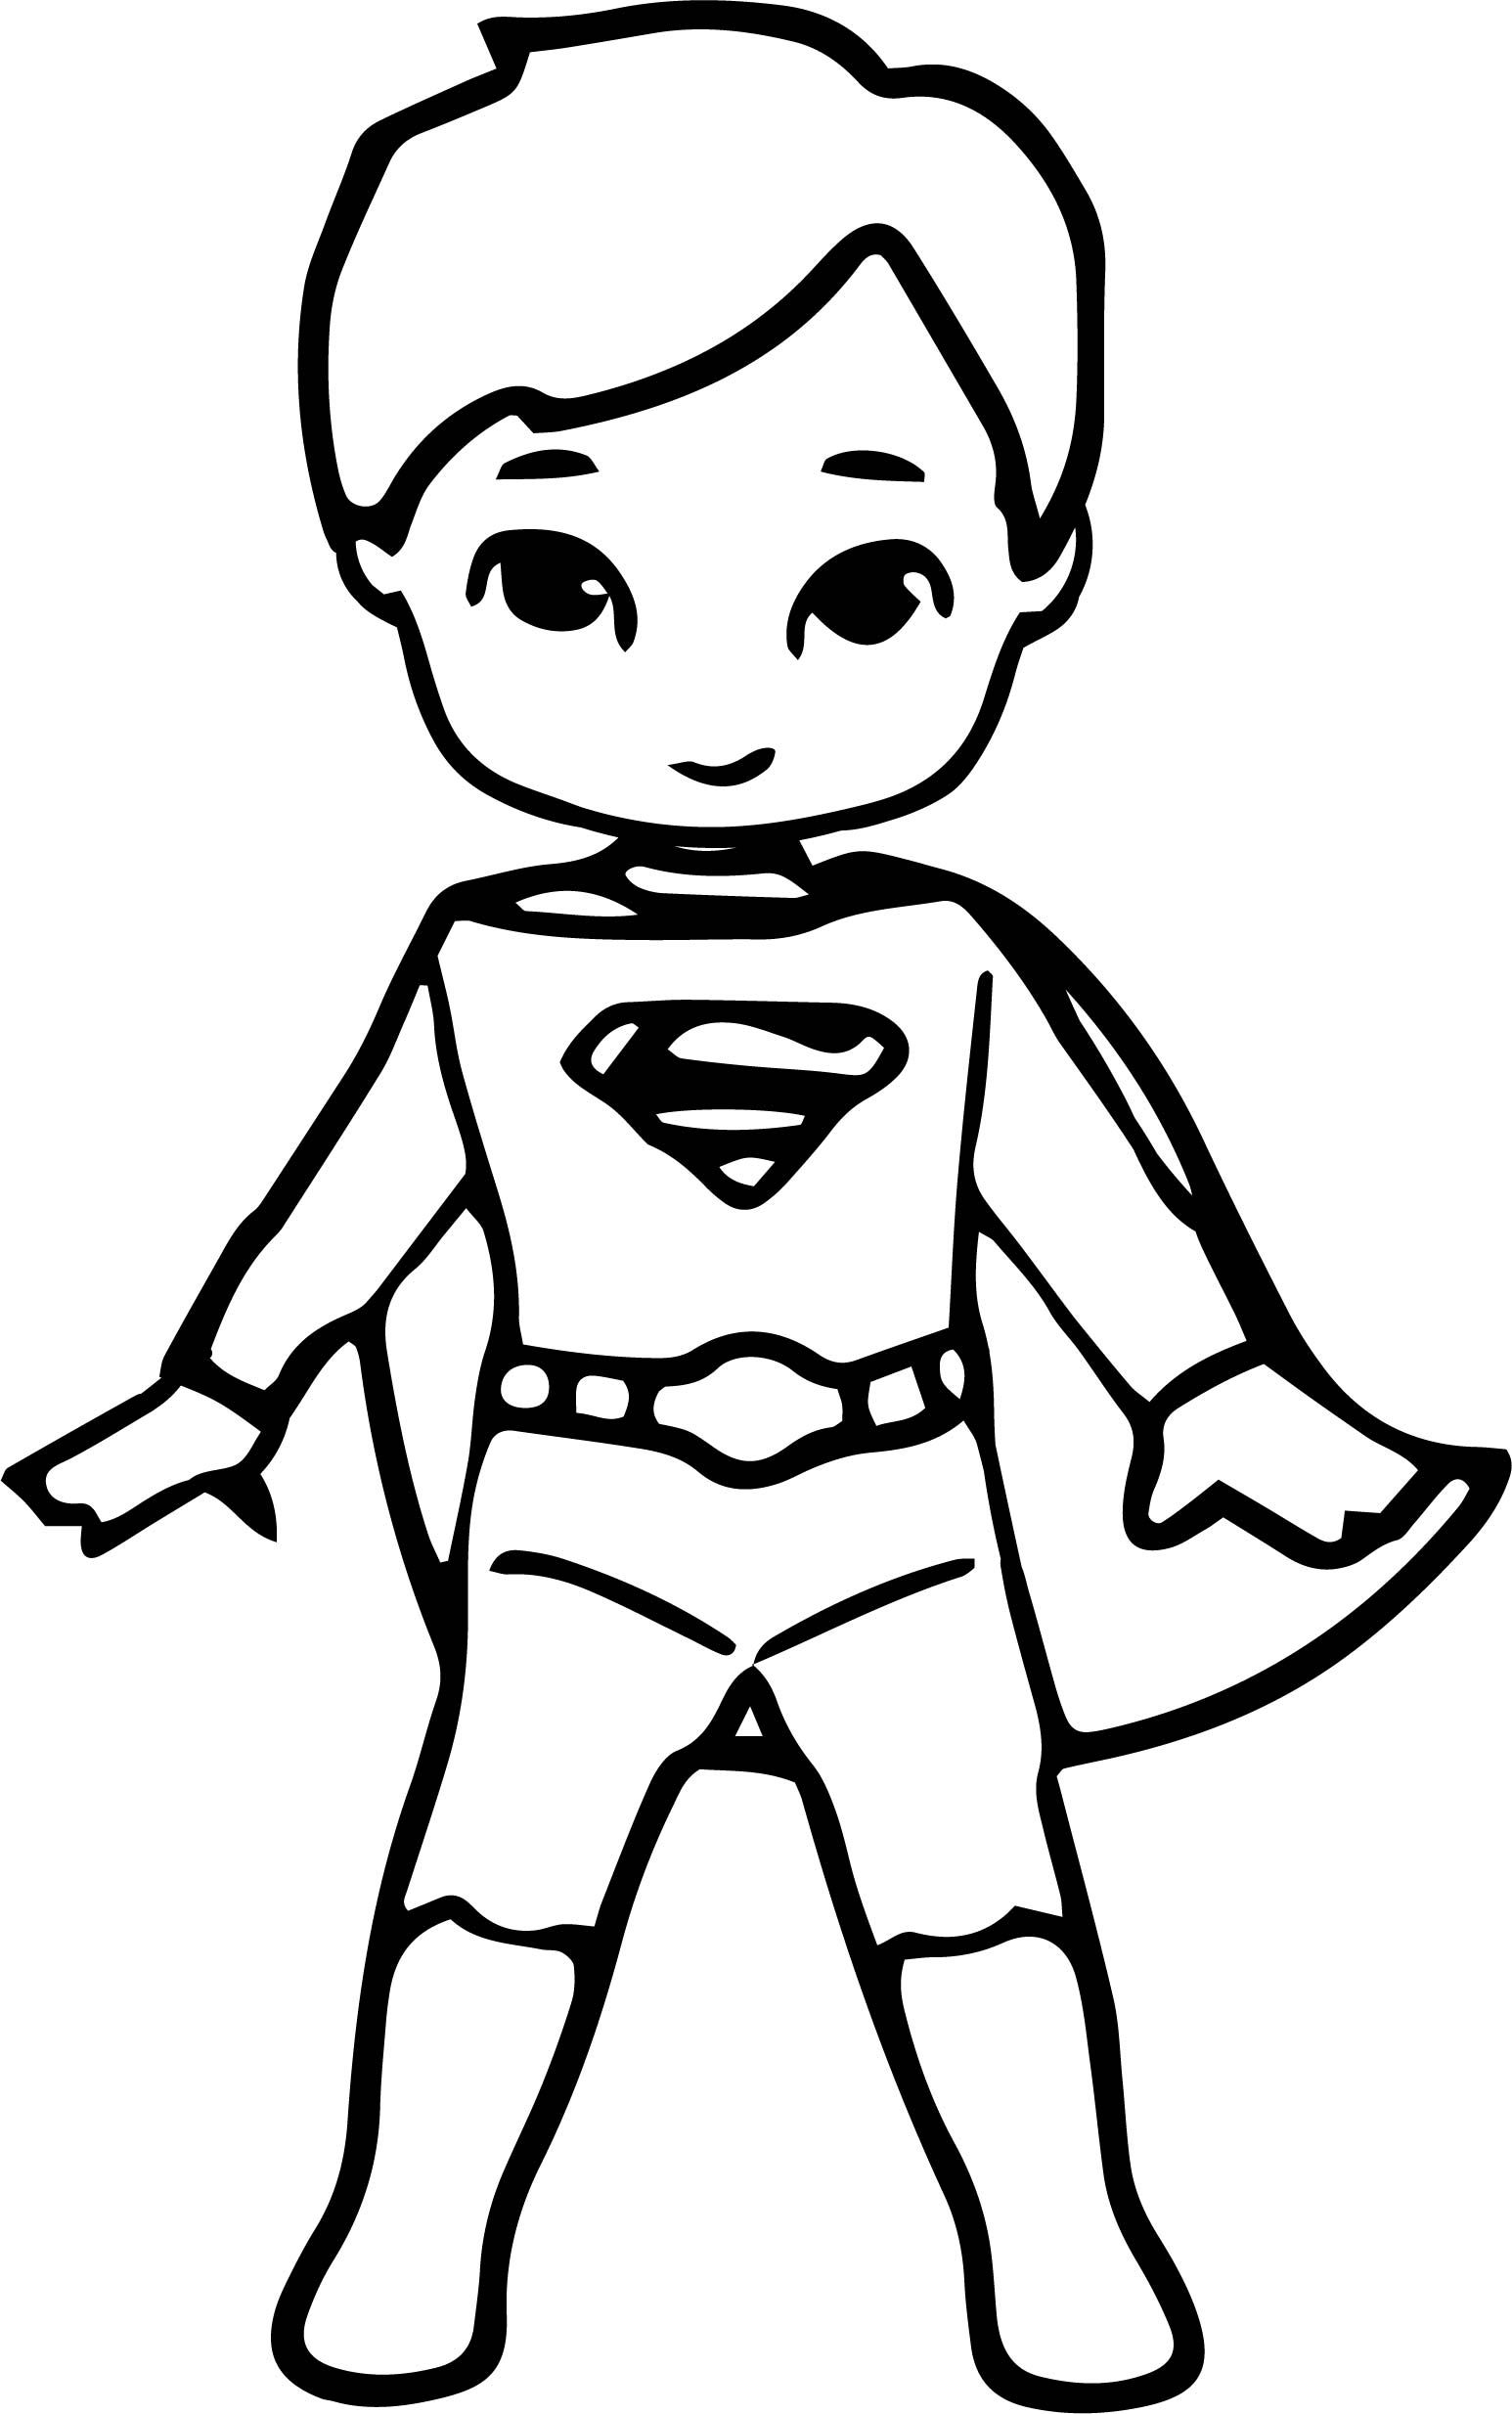 Printable coloring pages superhero coloring superhero coloring pages cartoon coloring pages